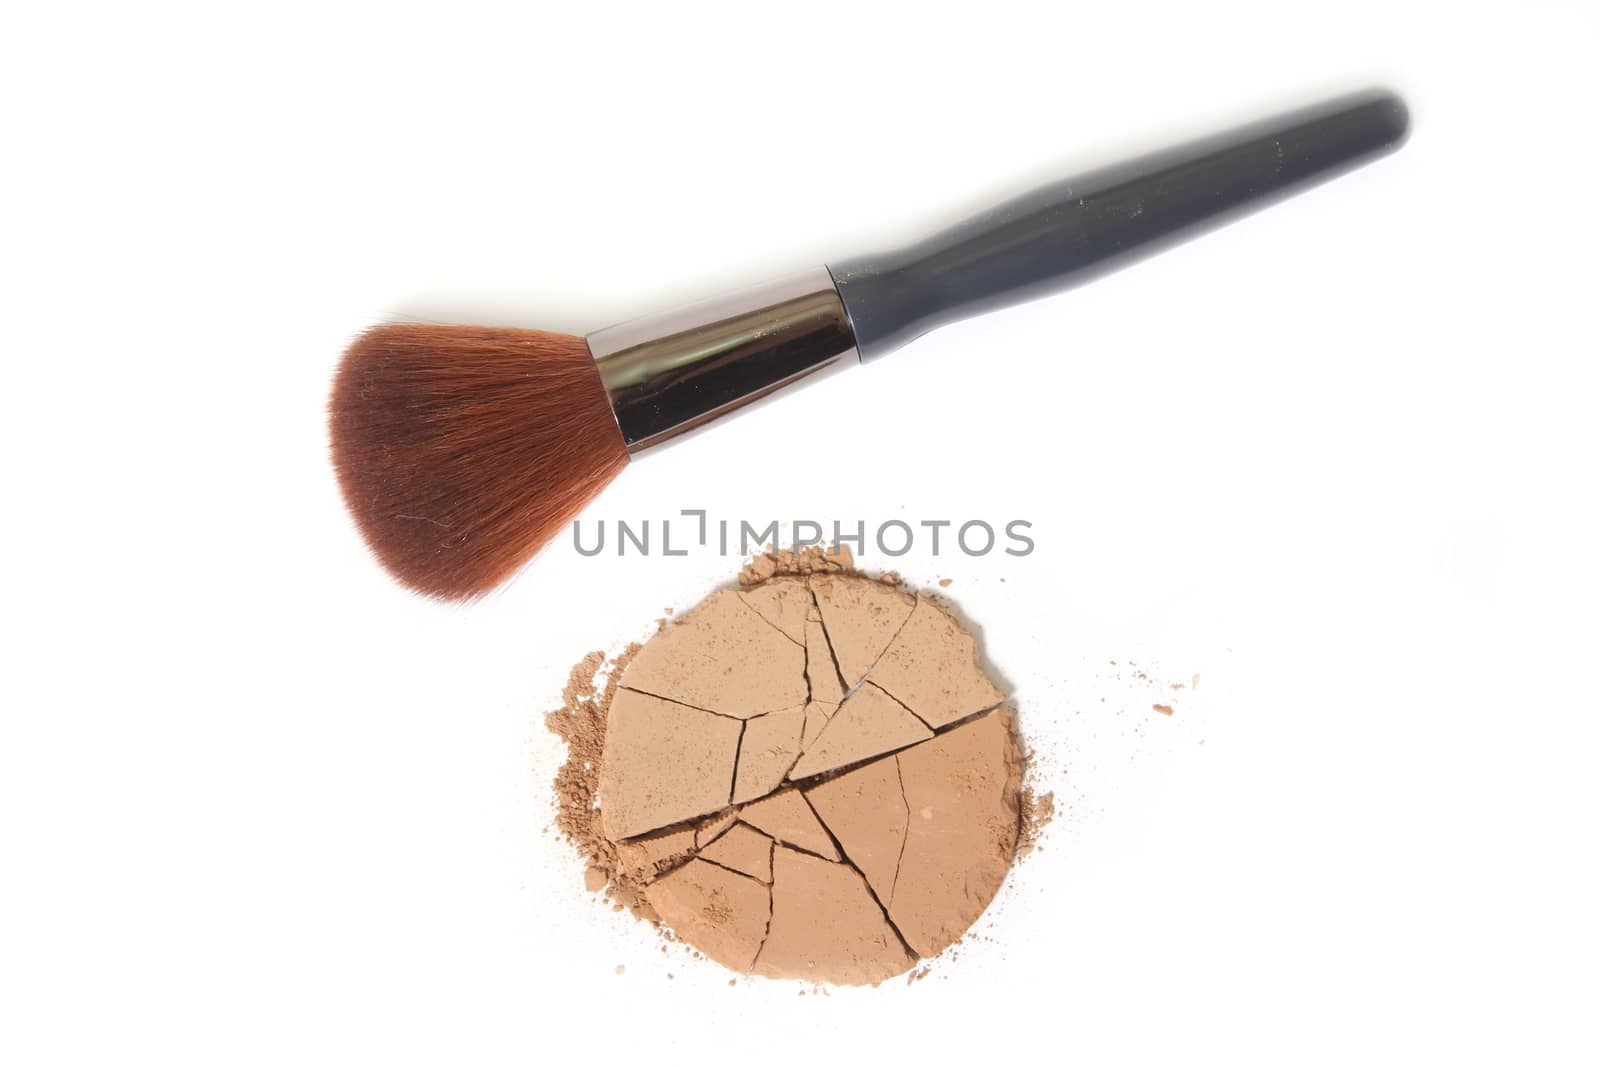 Bronzer or Contour Powder With Brush on White by Marti157900